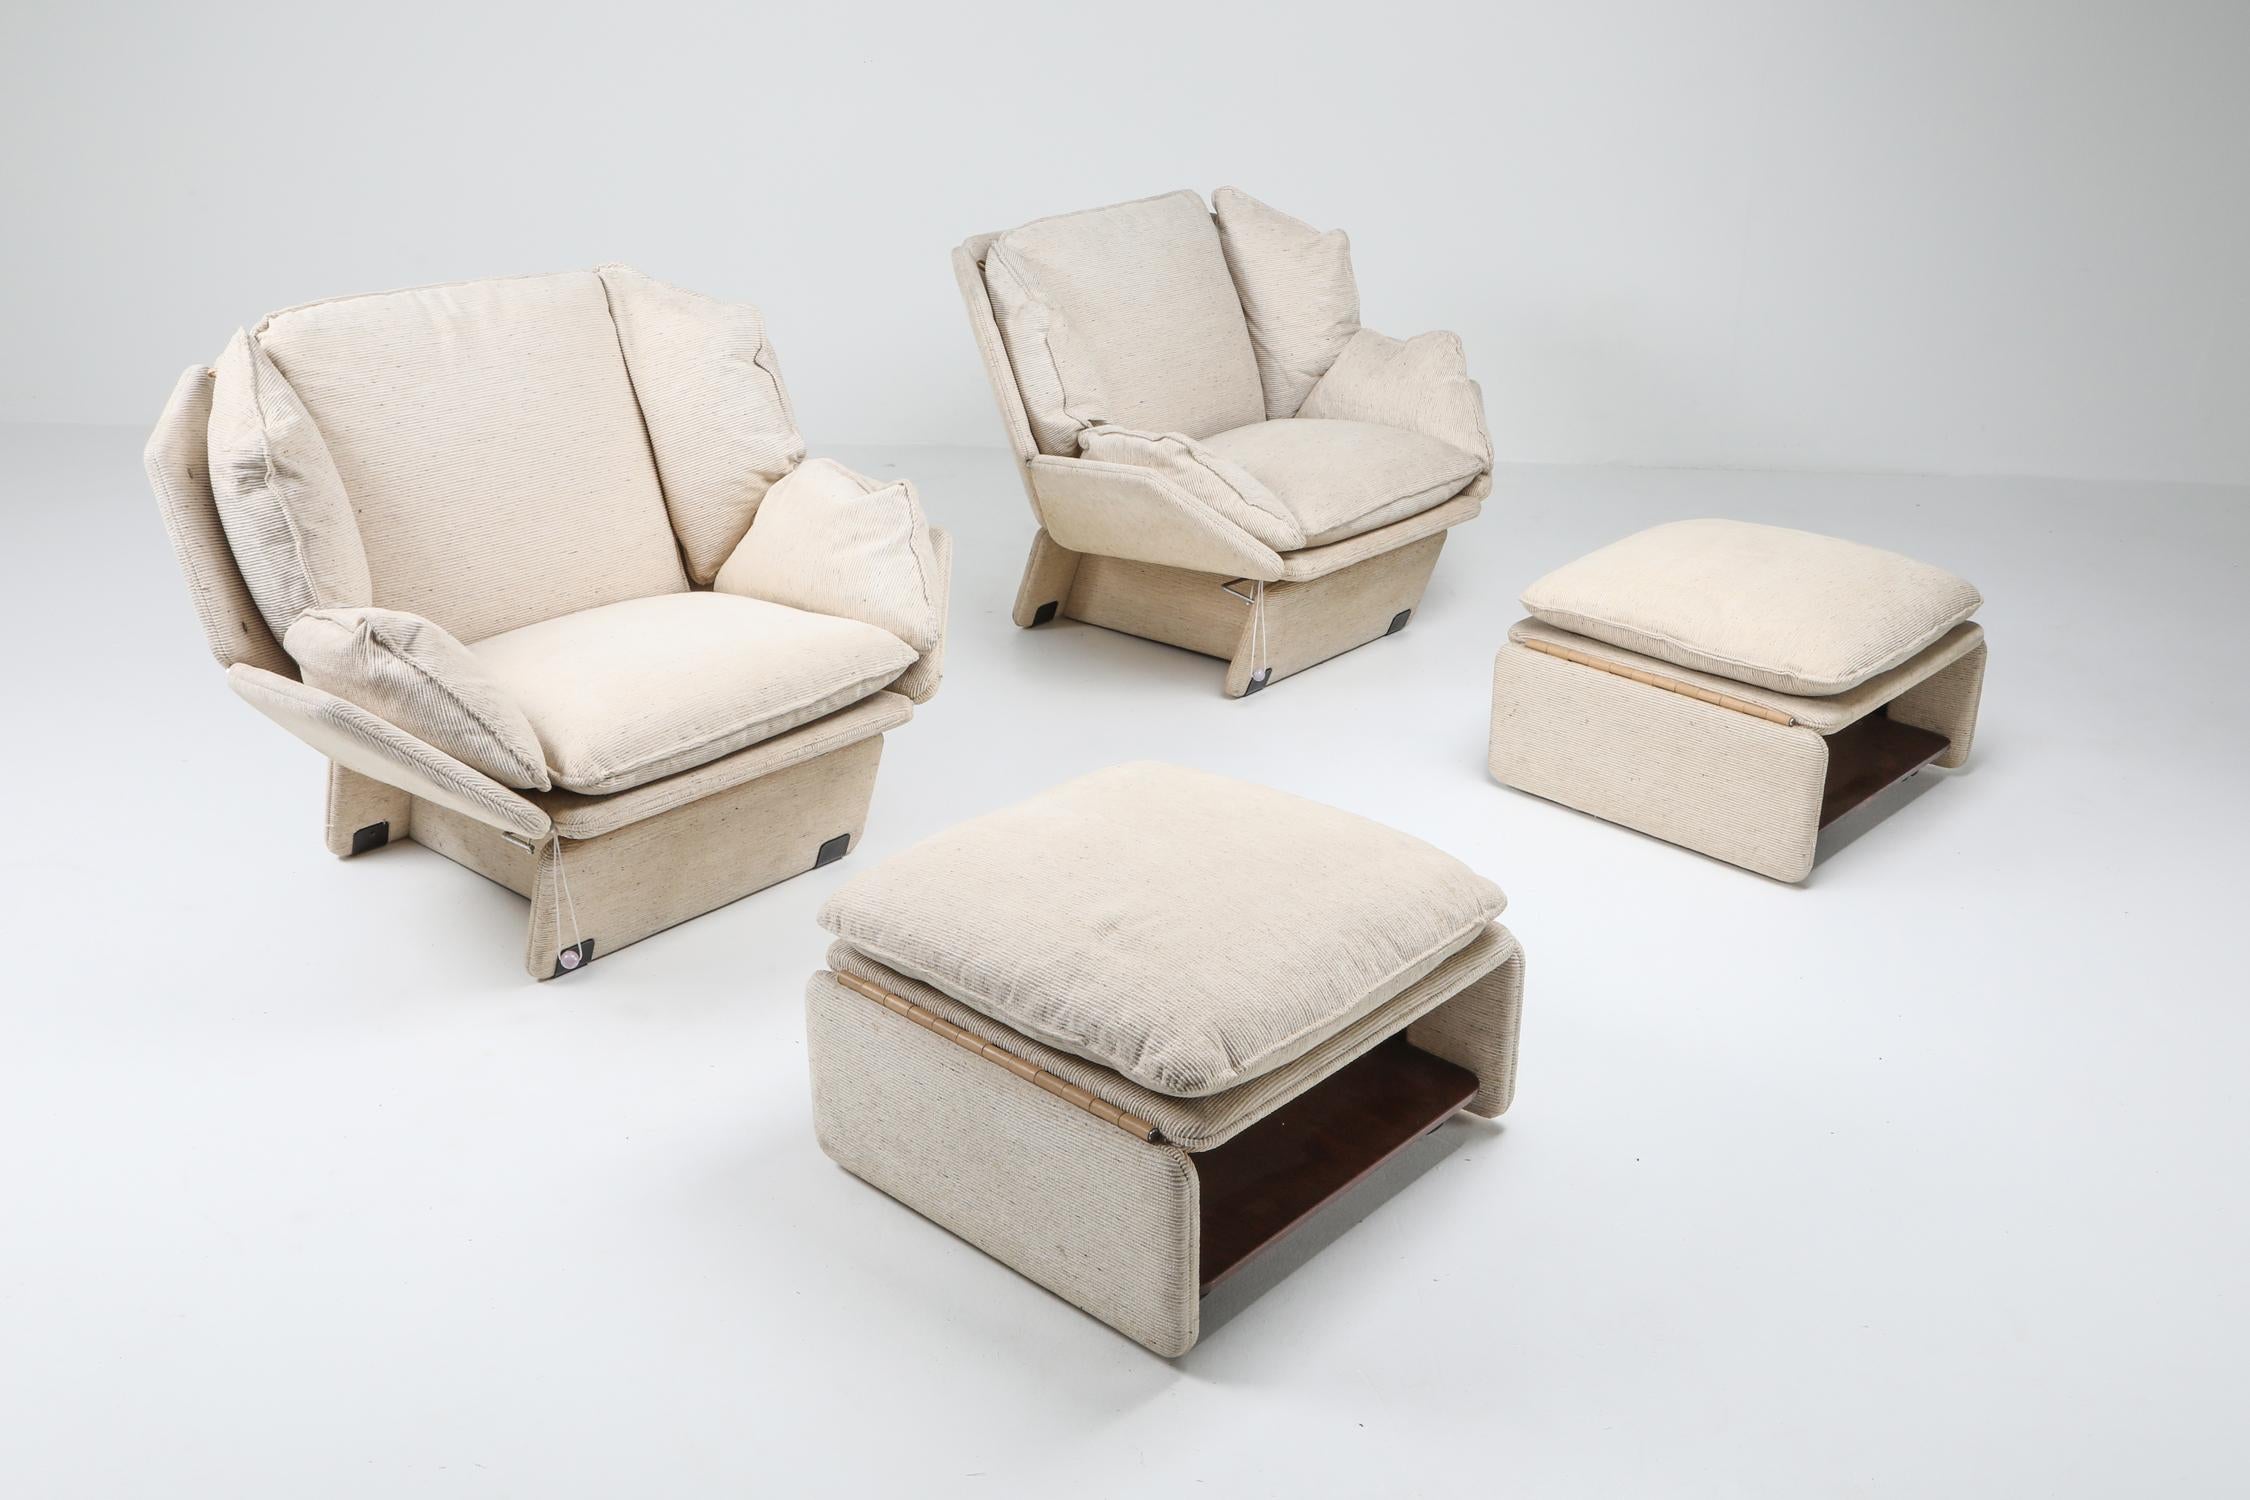 Postmodern pair of lounge chairs with ottoman, Italy, 1970s

Unusual pair of lounge chairs who'd fit perfectly with the architectural John Lautner Goldstein house.
The lounge chairs have a reclining mechanism, and include an ottoman each.
The